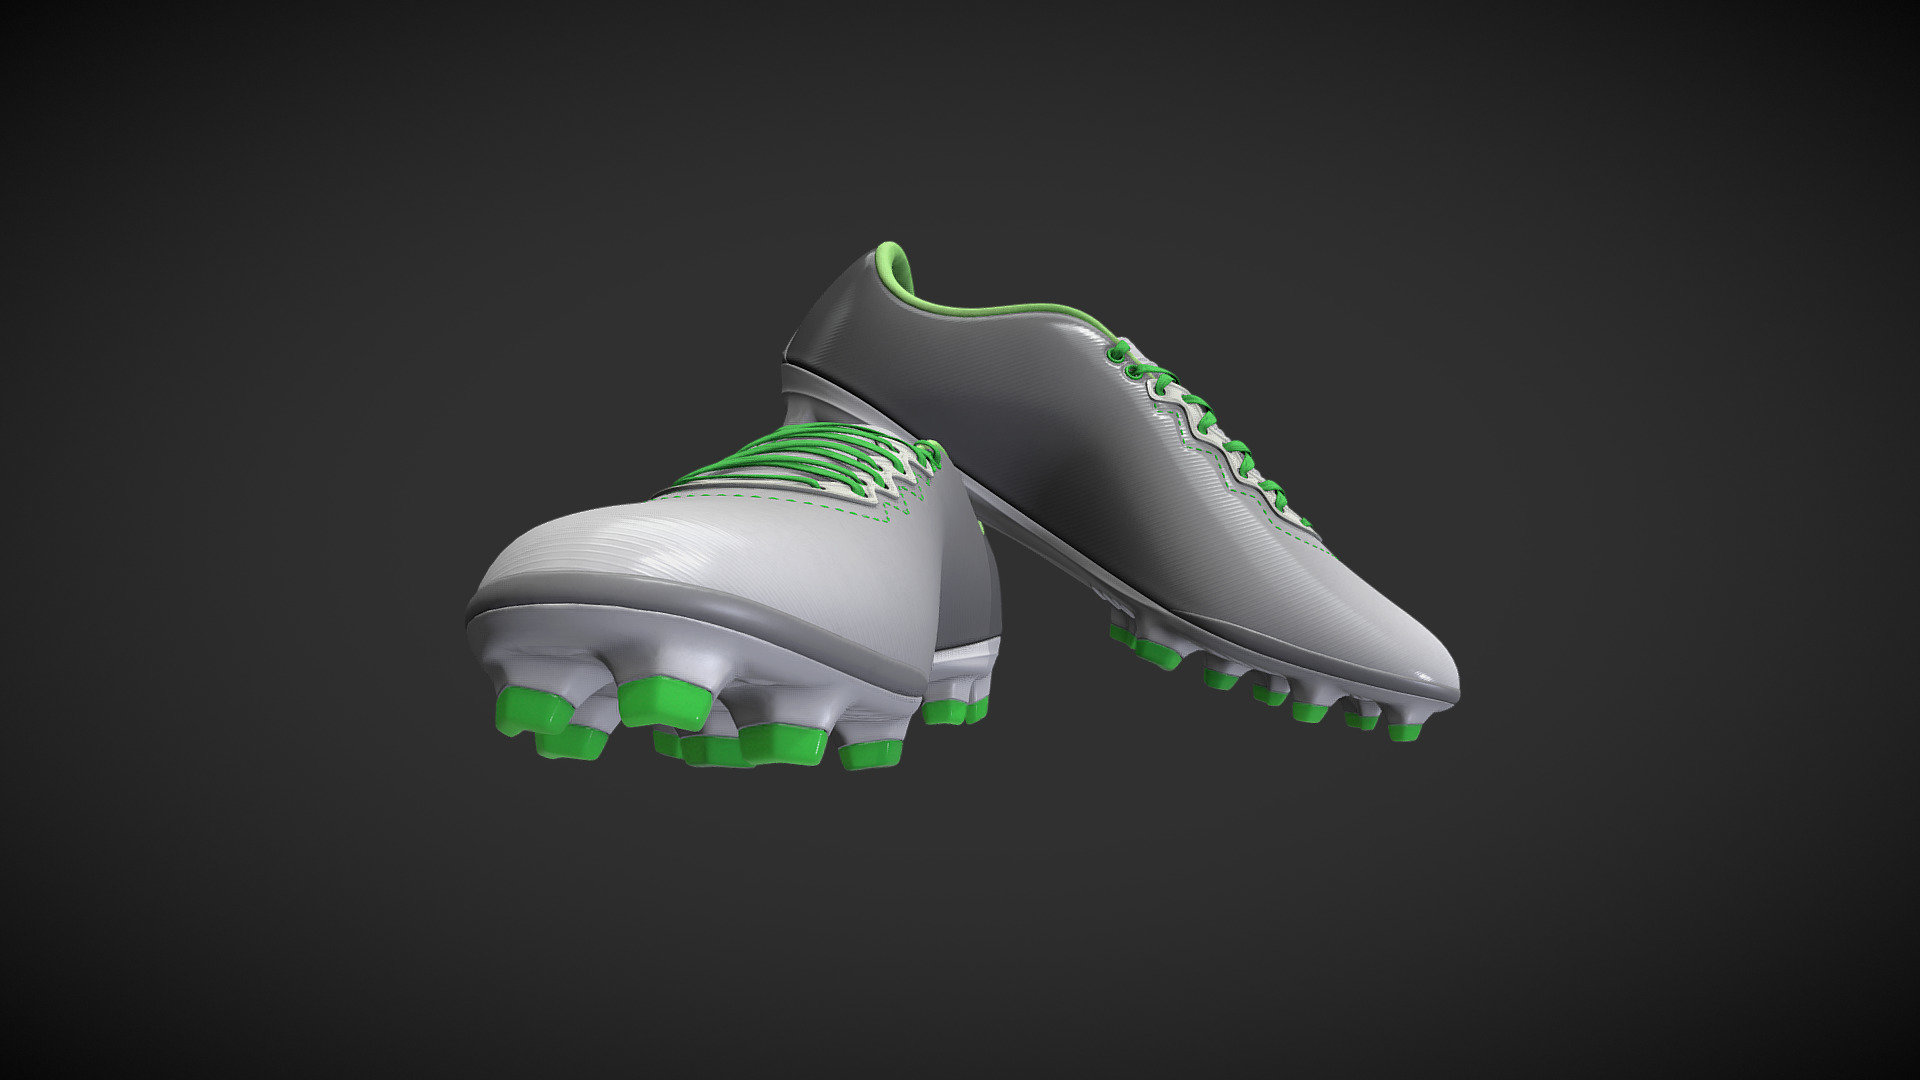 Model of generic football boots. 

Fully customizable in terms of textures and materials. The ones presented here is just an example. Created for CGTrader's 3D Sports &amp; Hobbies Challenge. All modeling and detalization choises are made to follow the rules and guidelines of the contest.
-link removed- - Football Boots - 3D model by StubbornFunkyDonkey 3d model